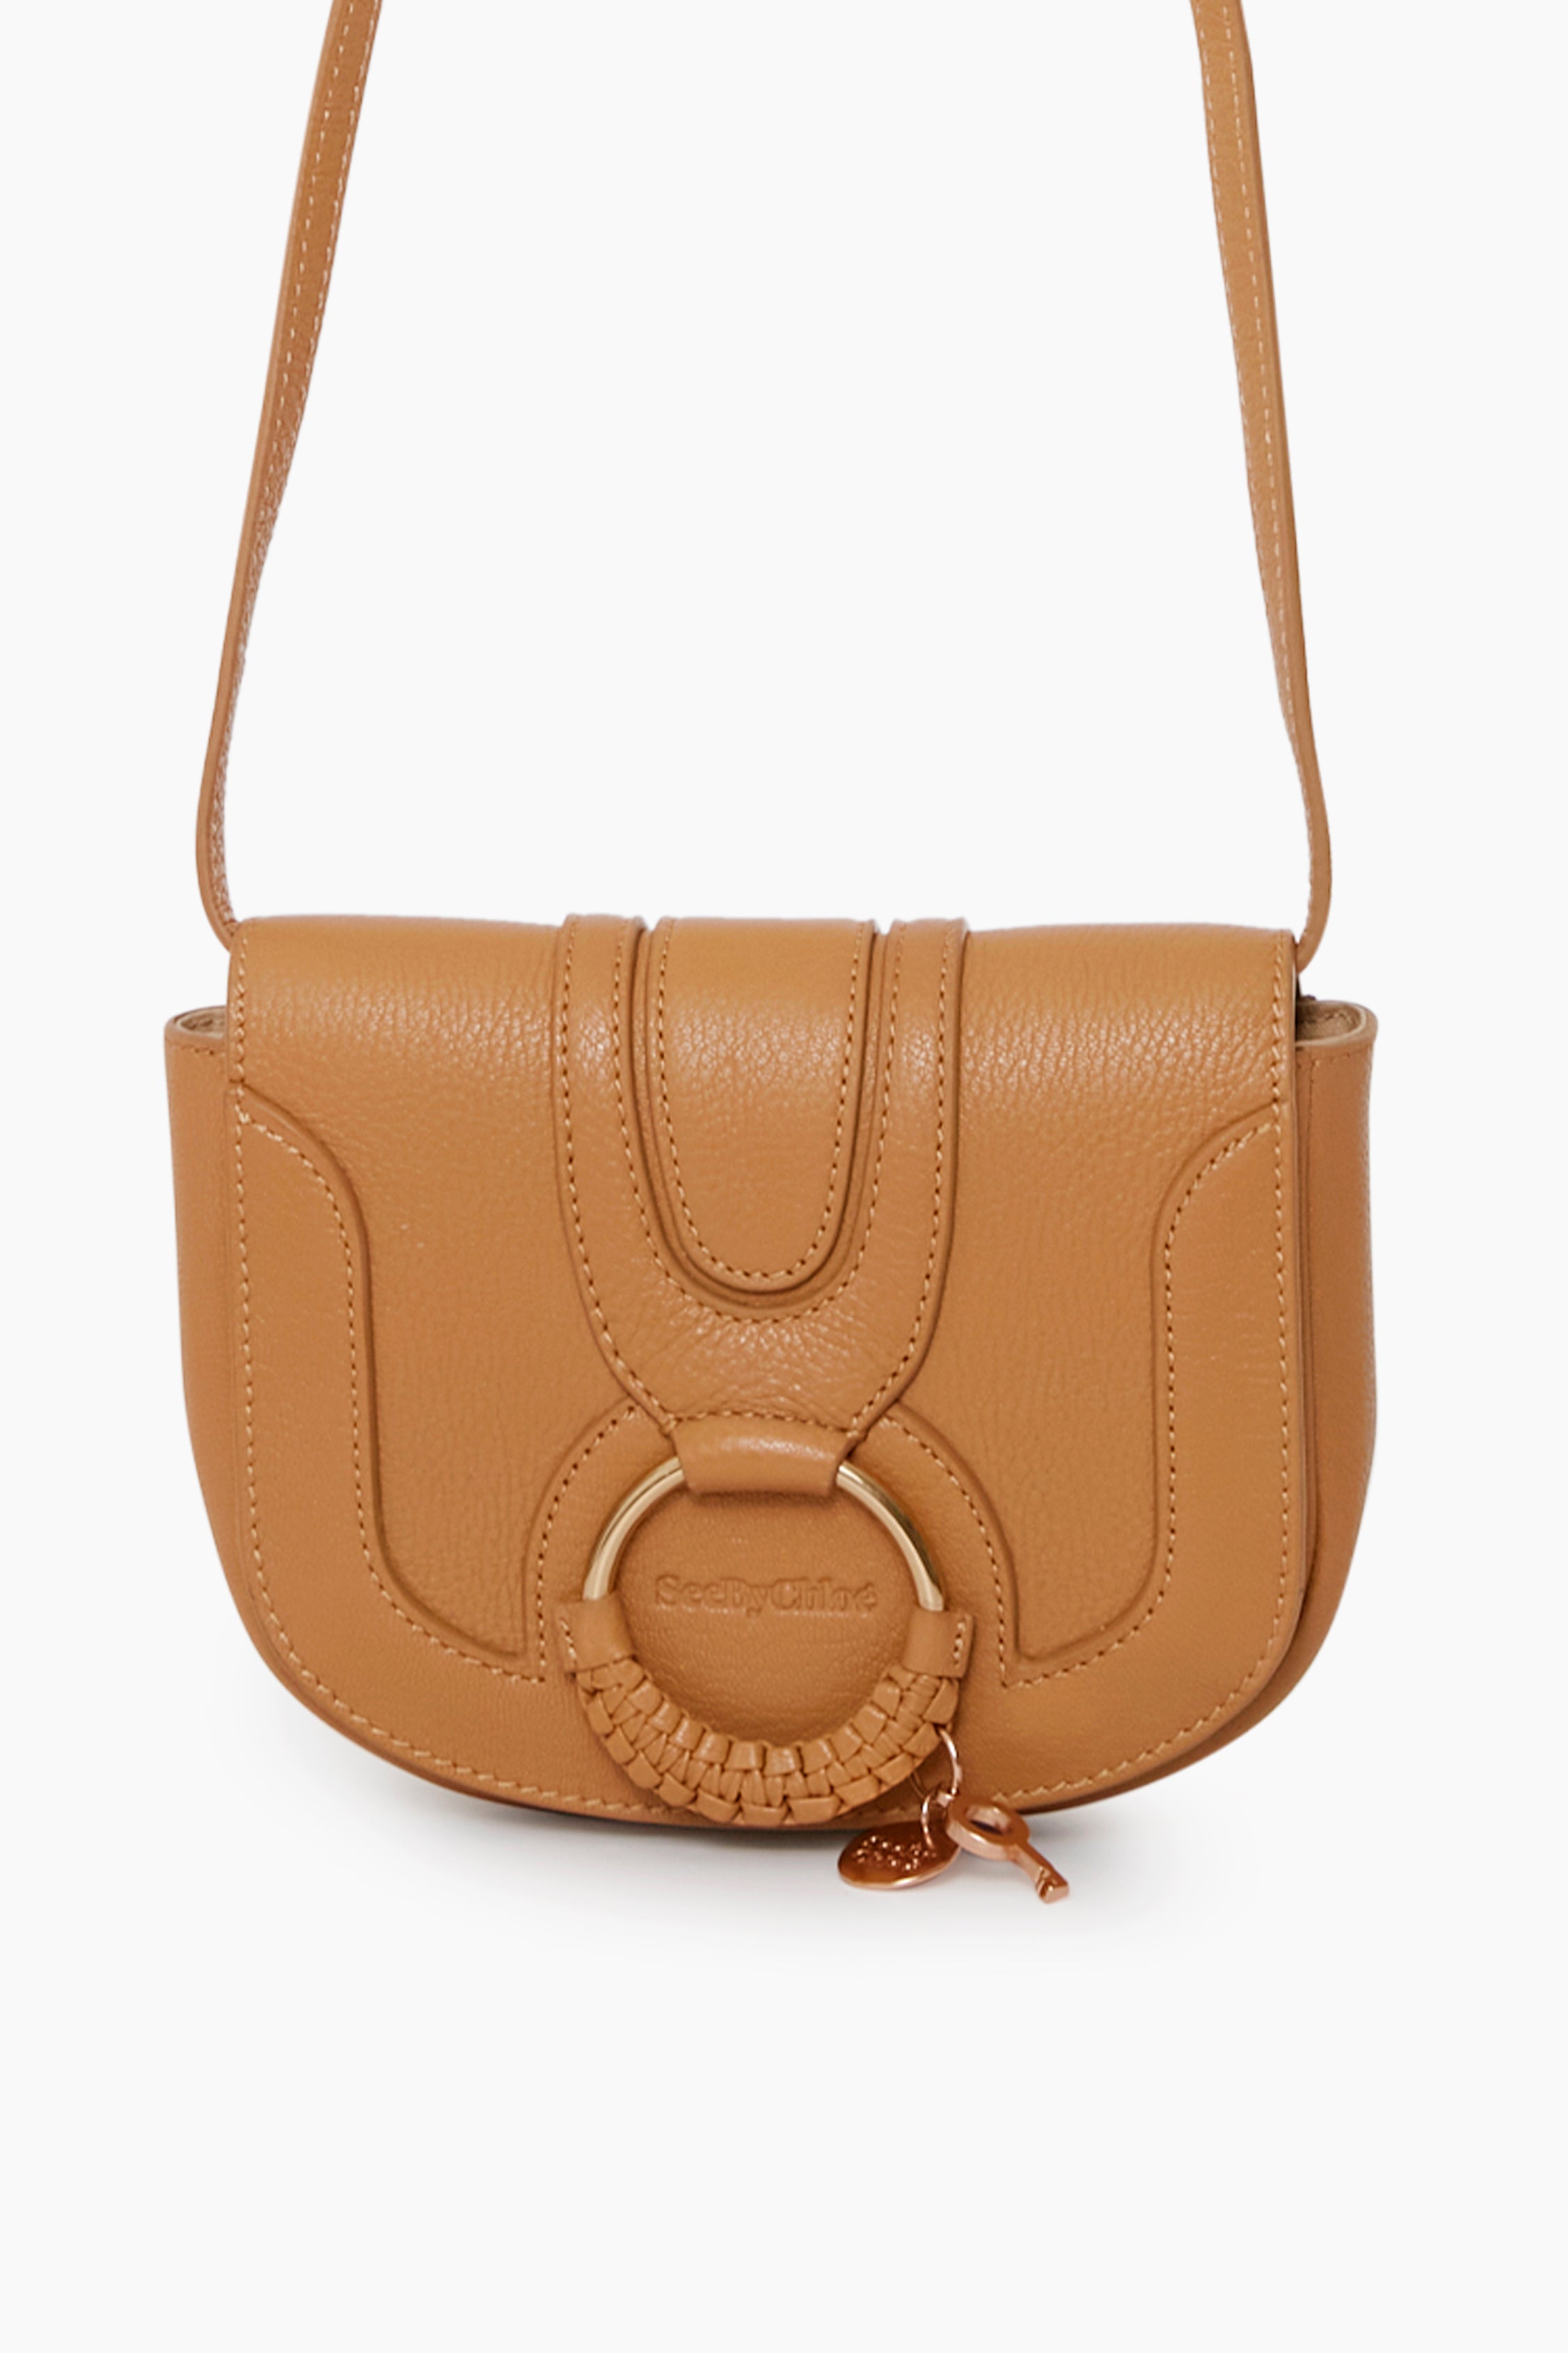 Annie's Finds Camel Leather Signature Tote